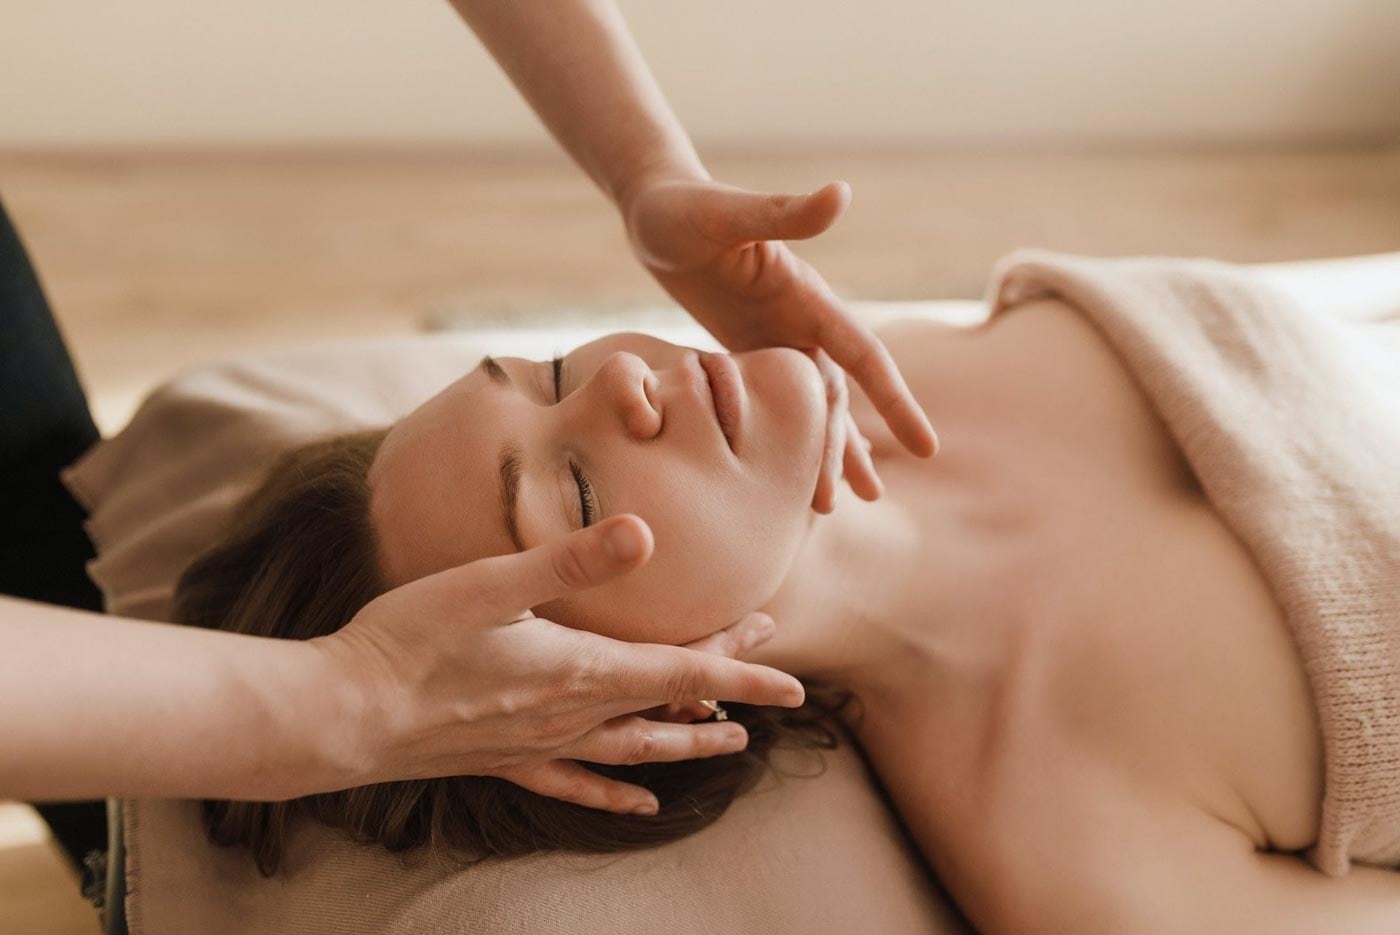 A woman getting a massage in a spa.